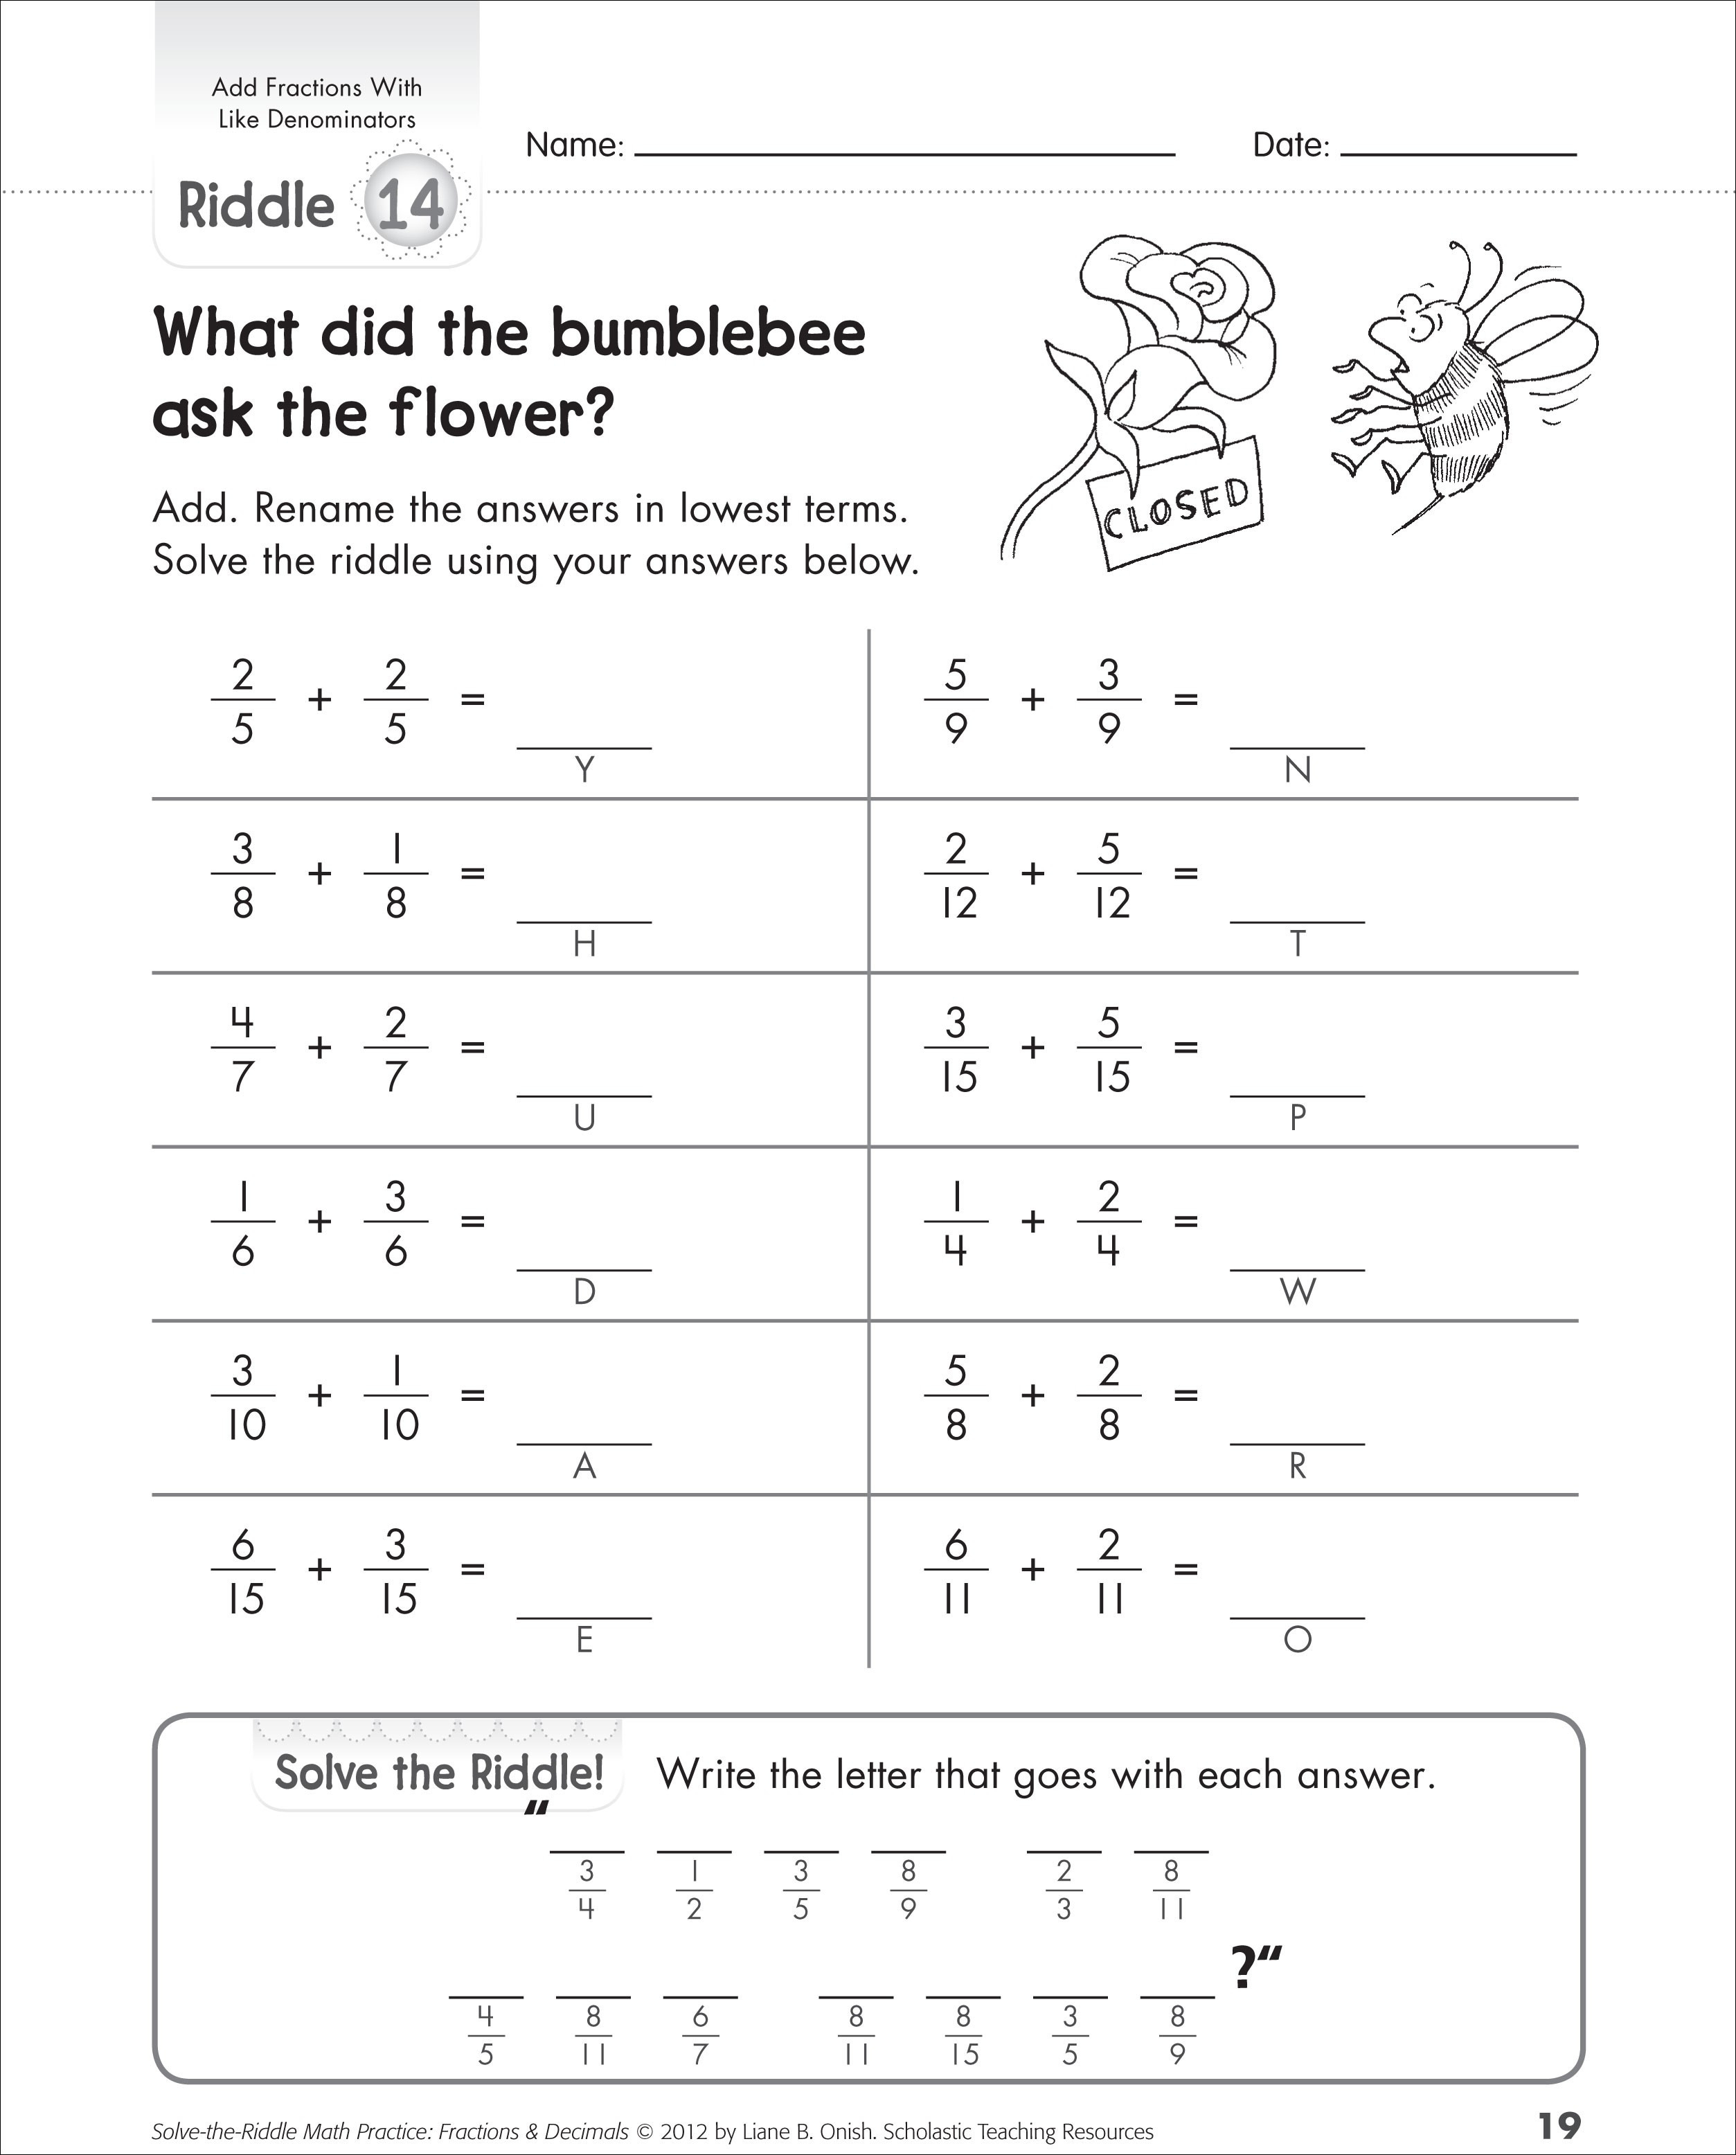 5th-grade-math-worksheets-adding-fractions-with-unlike-db-excel